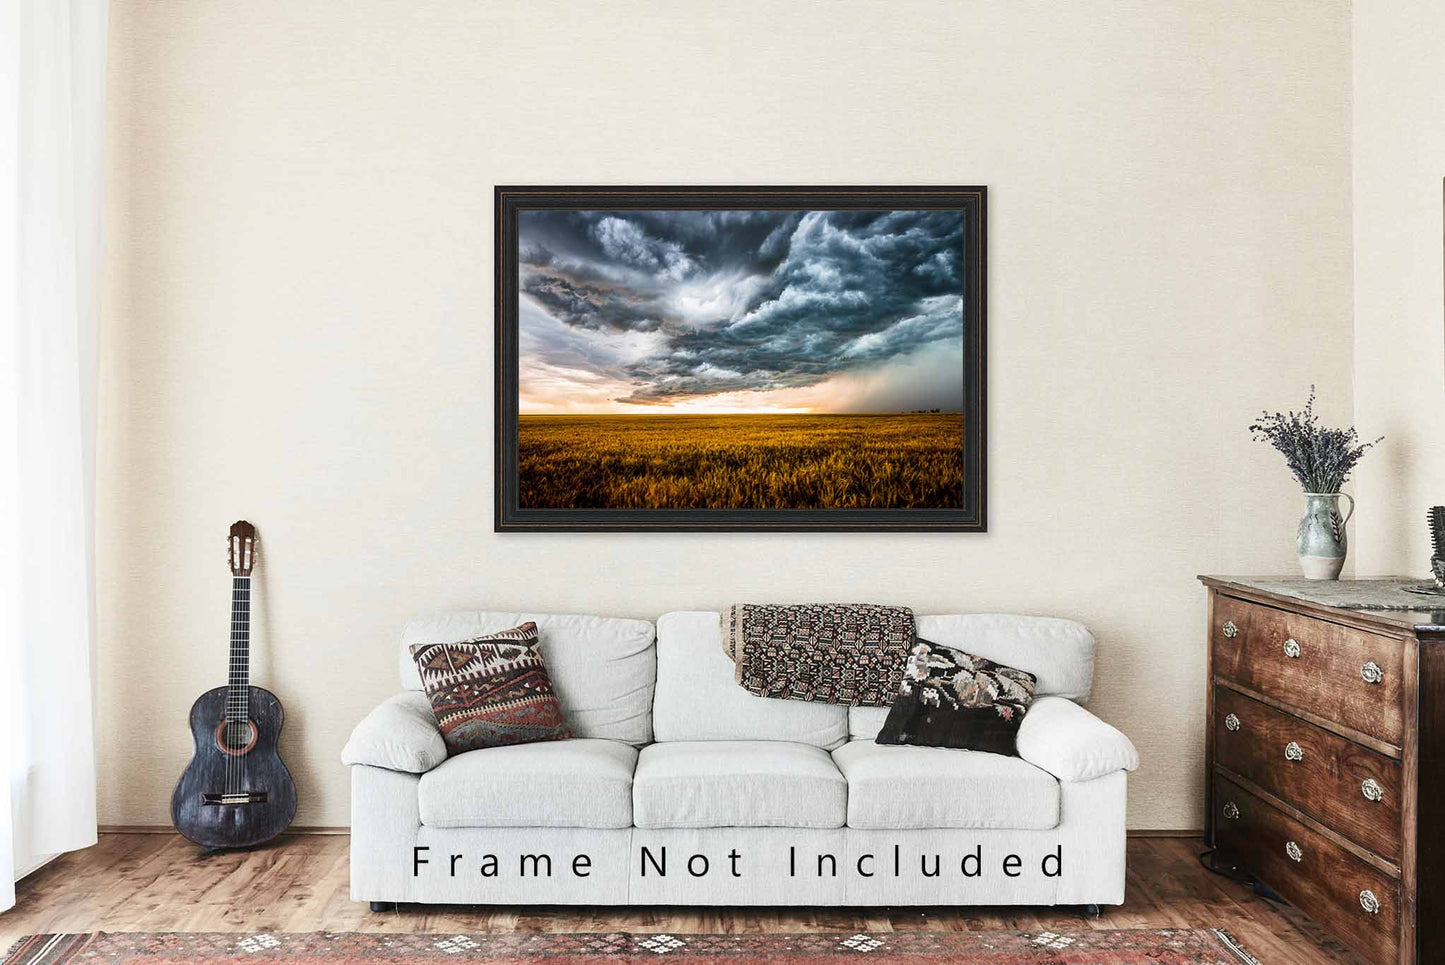 Western Wall Art - Picture of Storm Clouds Churning Over Wheat Field in Colorado - Landscape Photography Photo Print Artwork Decor